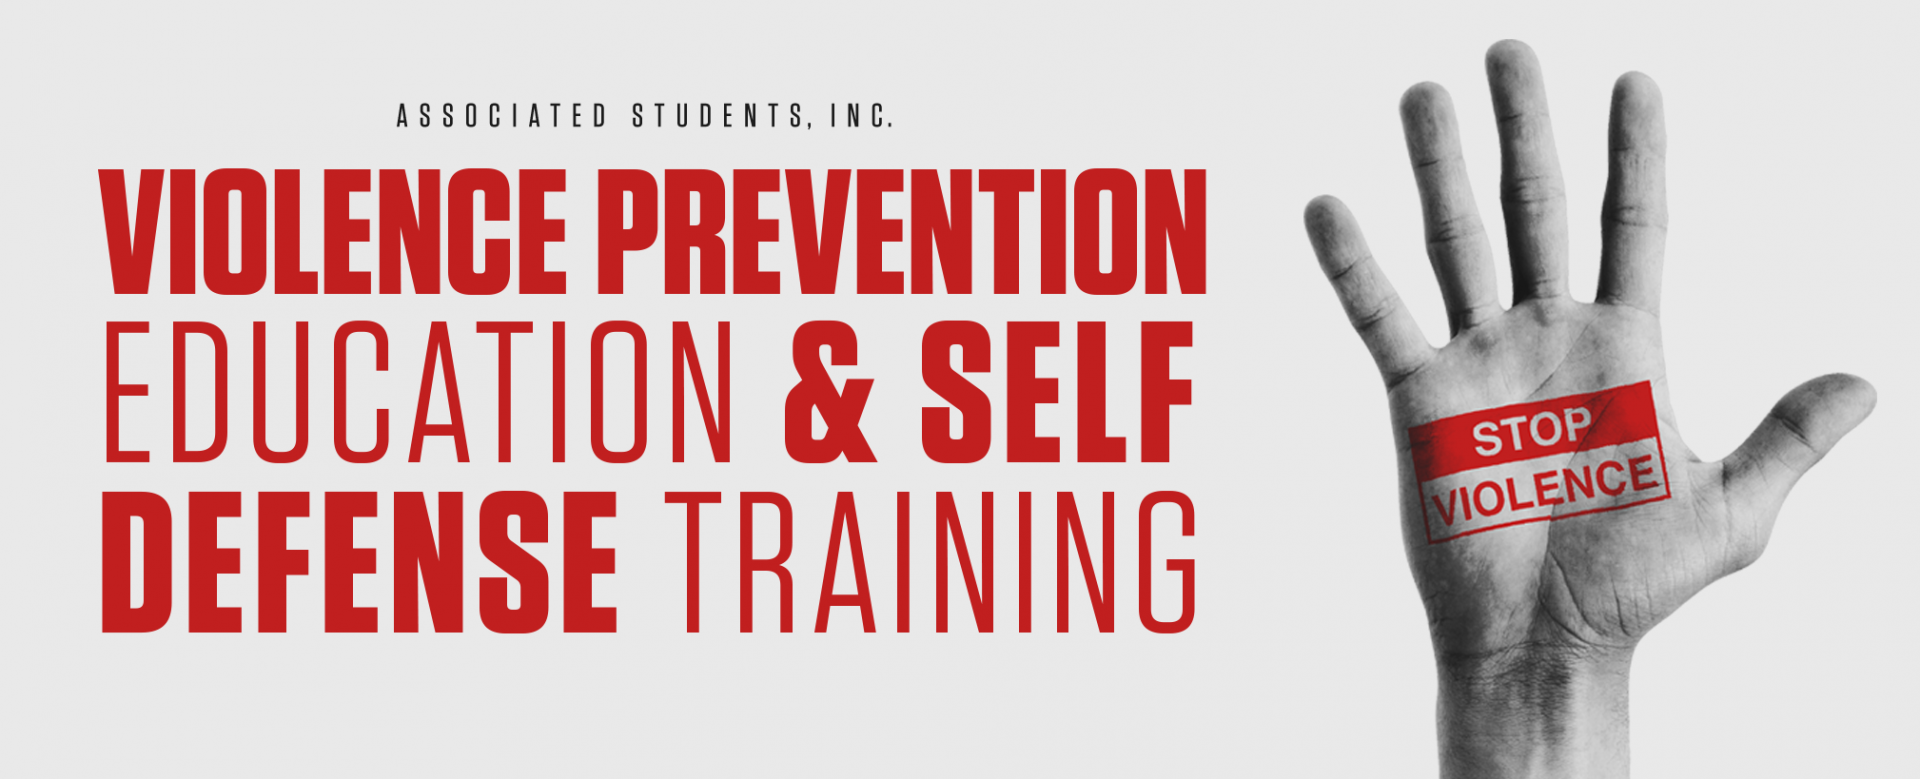 VIOLENCE PREVENTION EDUCATION AND SELF-DEFENSE TRAINING